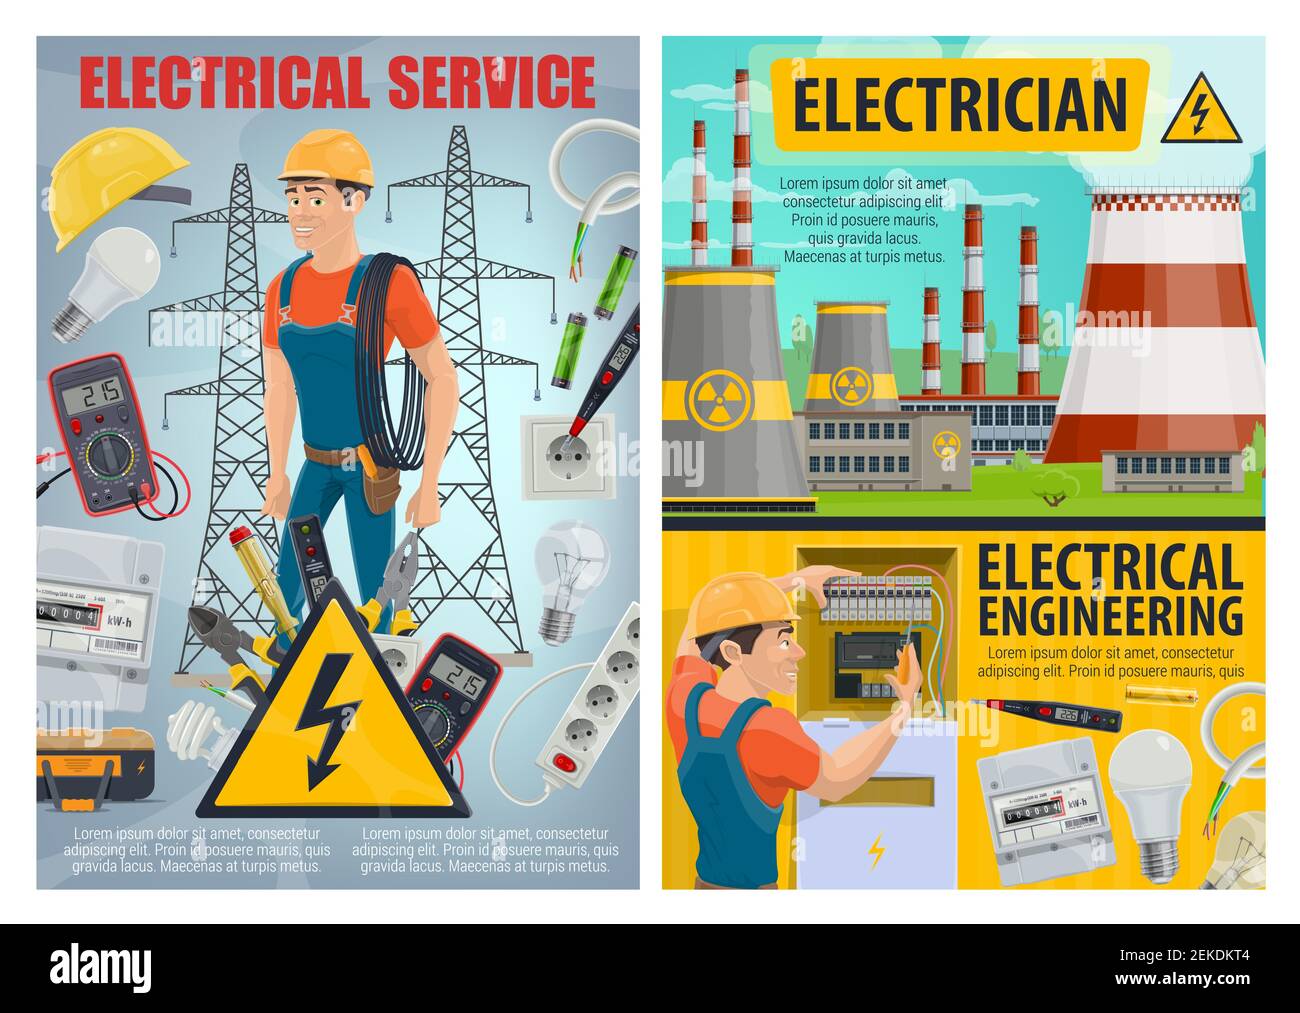 Electrical service and engineering vector design of electrician with electric tools and equipment. Power wire, tester and light bulbs, electricity met Stock Vector